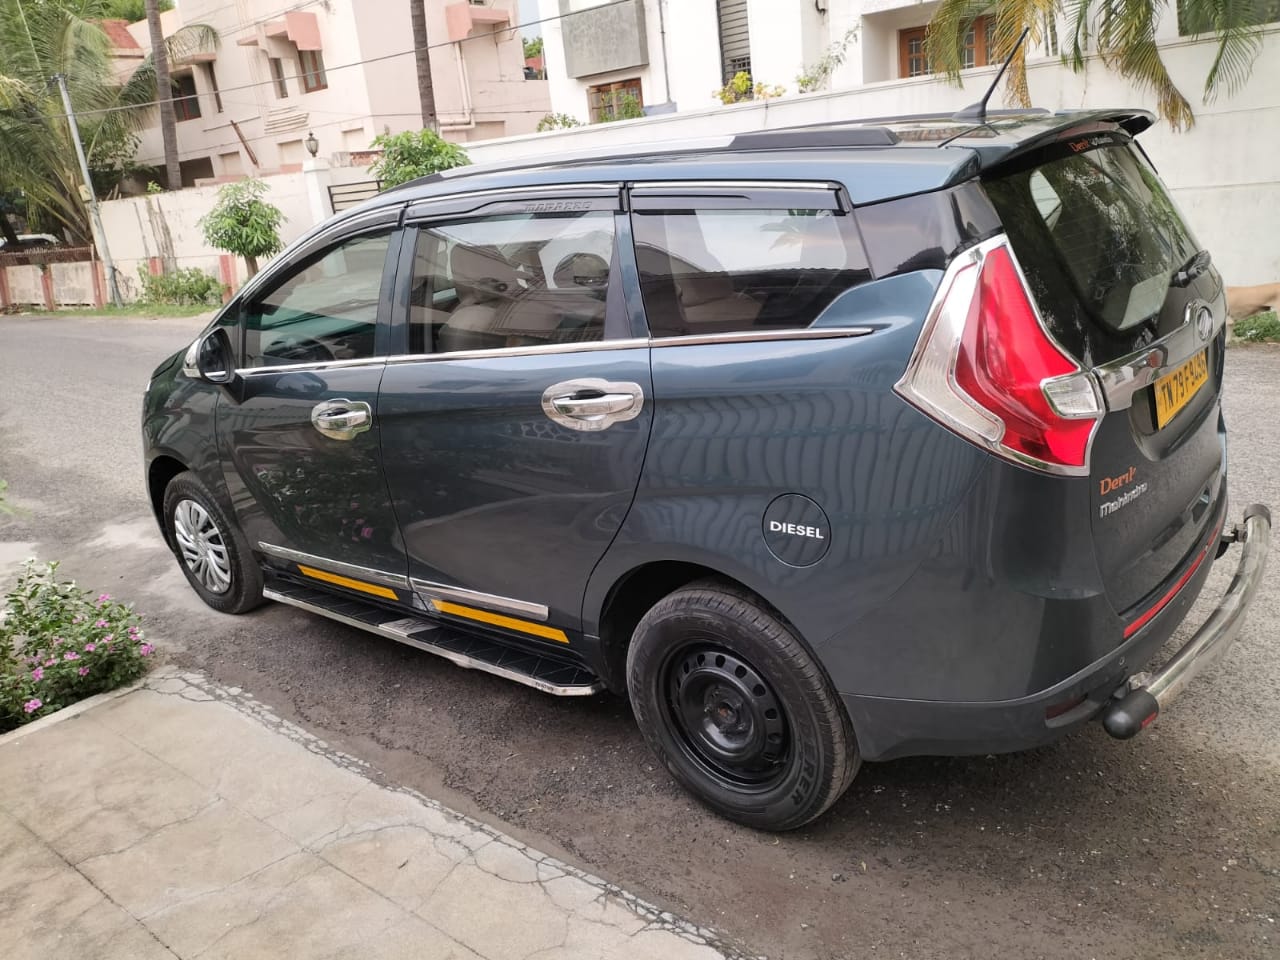 3855-for-sale-Mahindra-Marazzo-Diesel-Second-Owner-2019-TN-registered-rs-900000